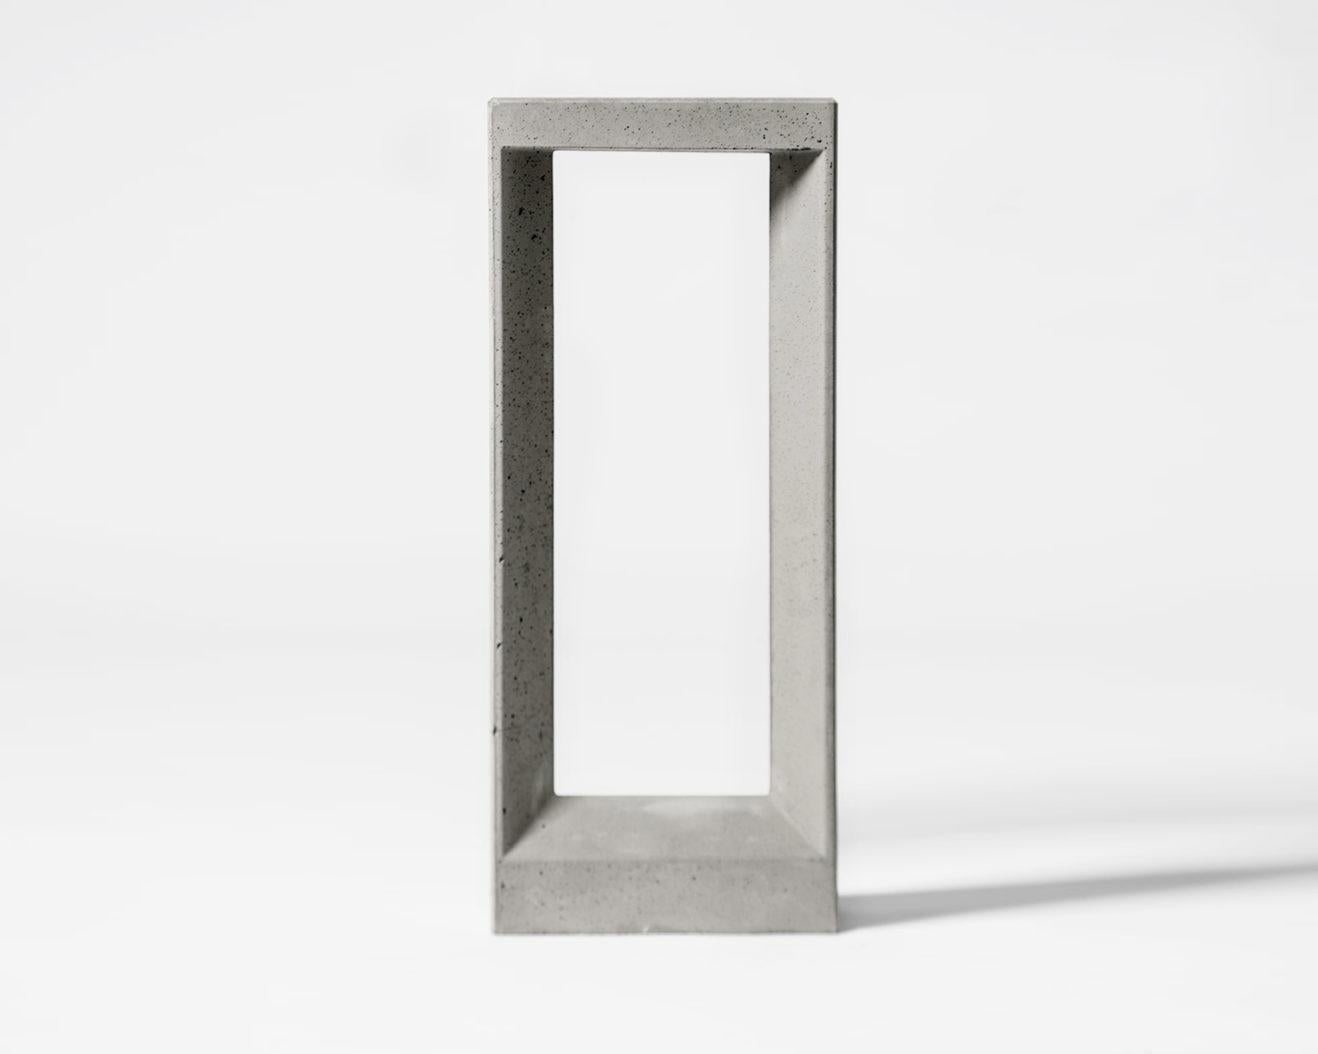 Chinese Concrete Outdoor Lighting 'Frame' by Bentu Design For Sale